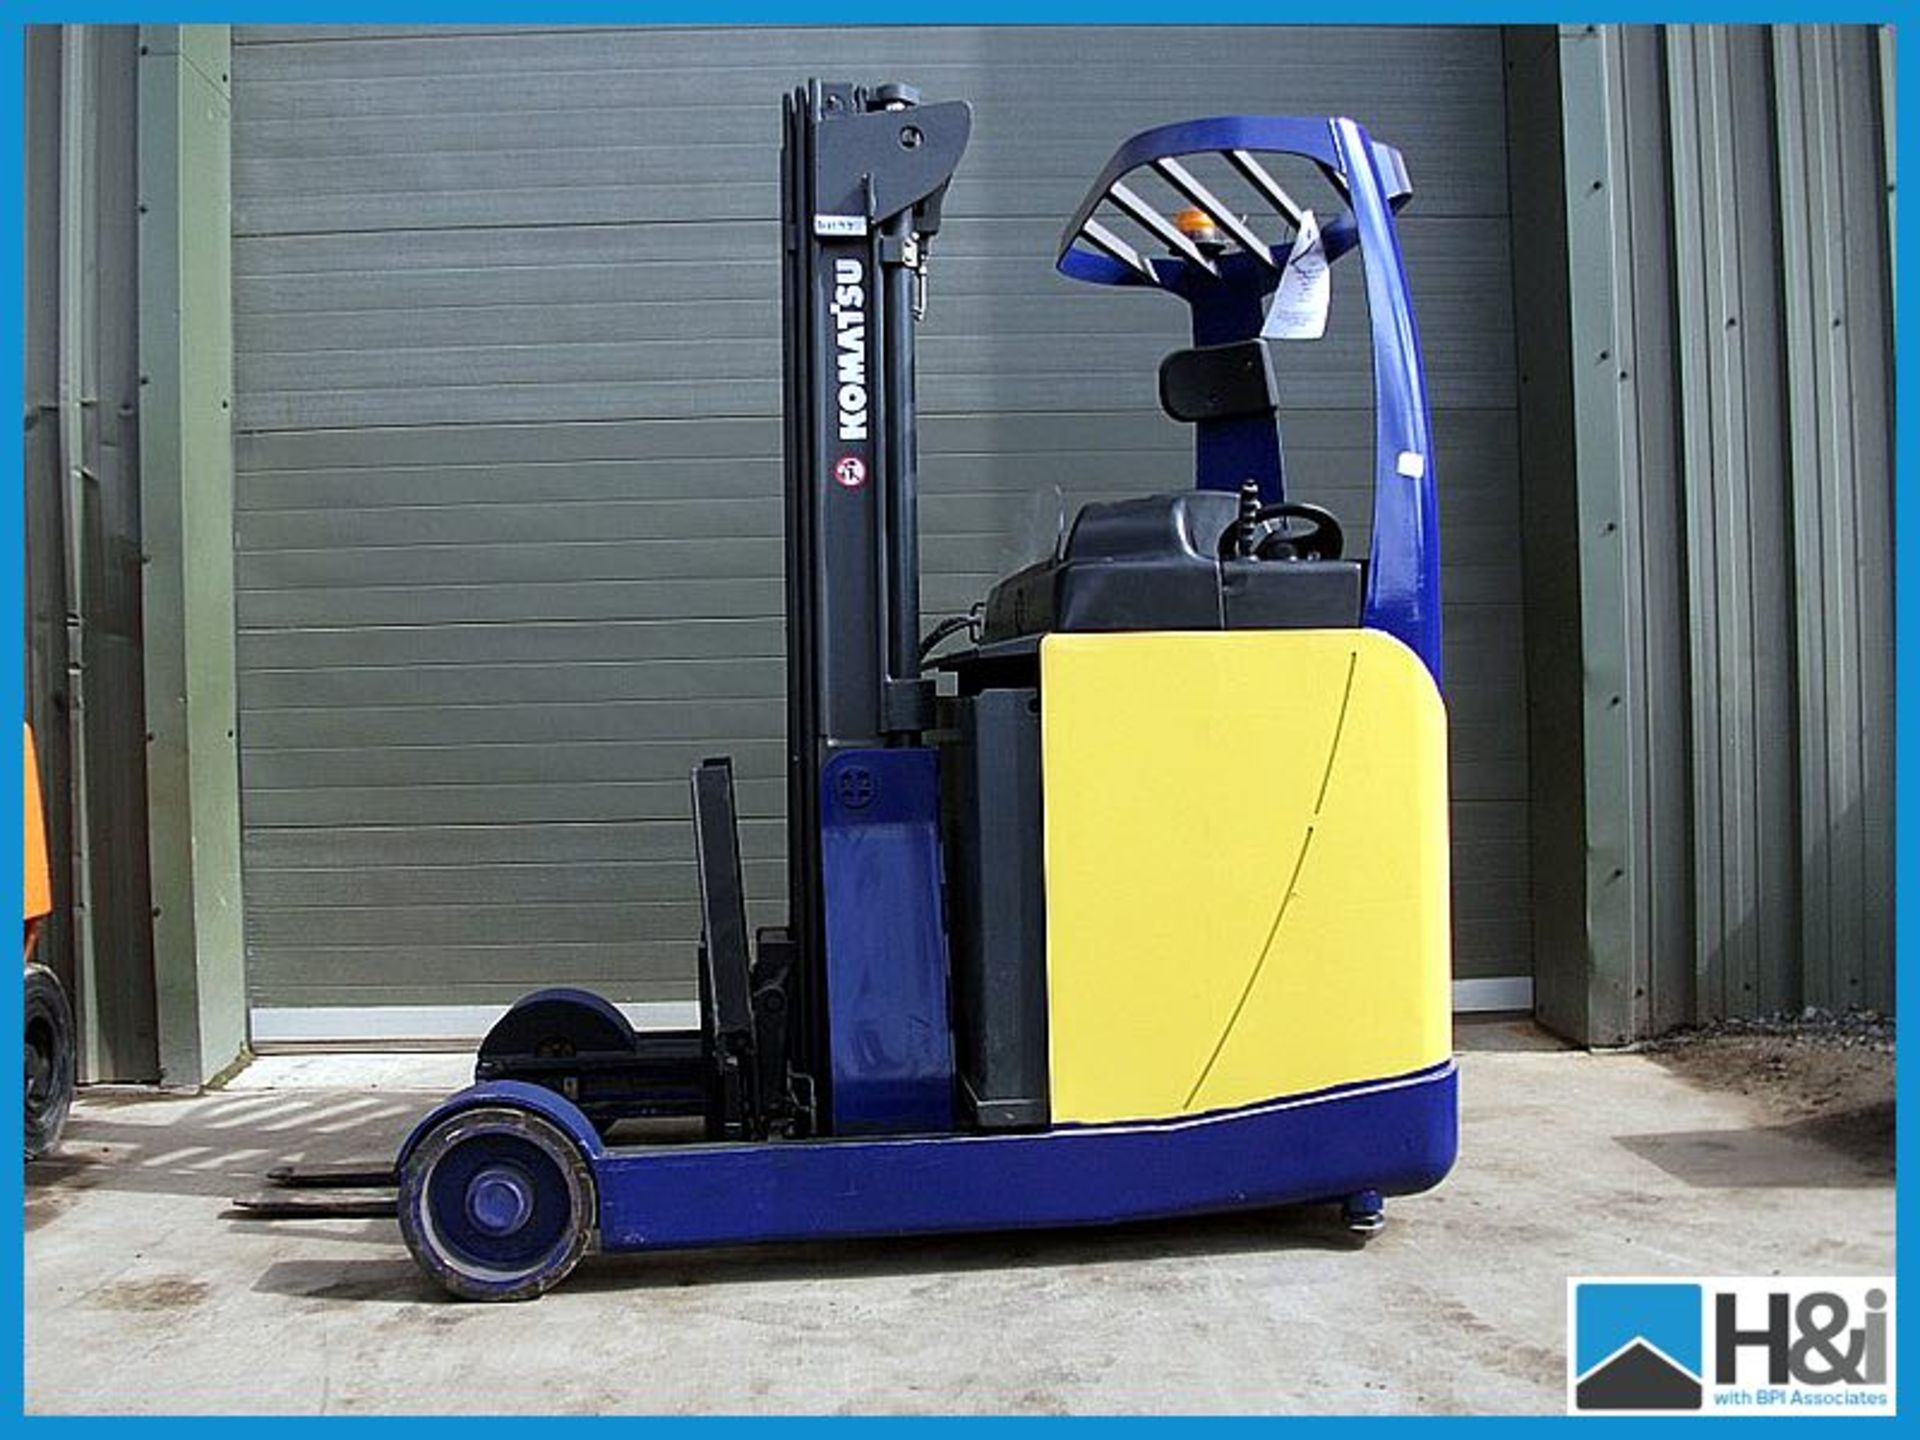 Komatsu reach truck electric 2500kg 2003 year 03638 hours running with charger  Appraisal: Good - Image 3 of 5